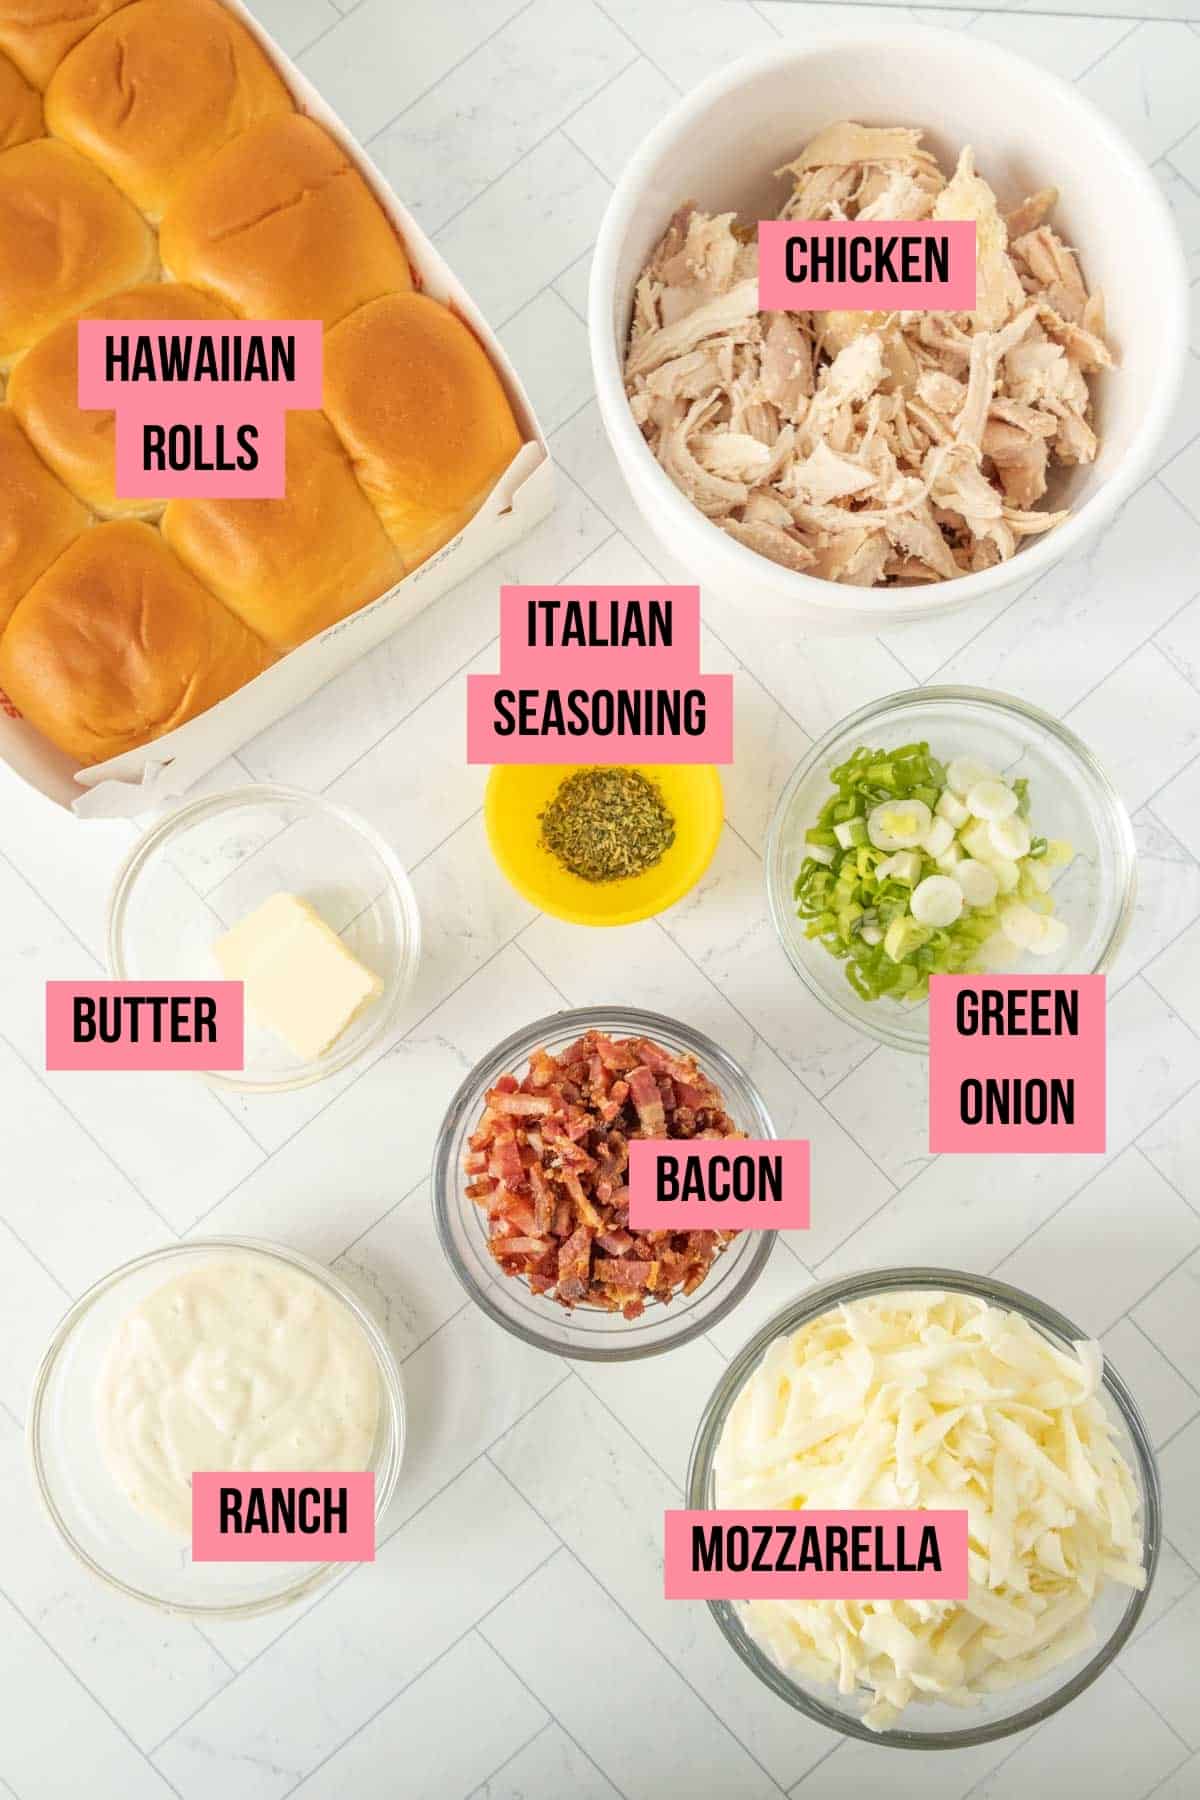 The ingredients for chicken sliders are shown on a white table.